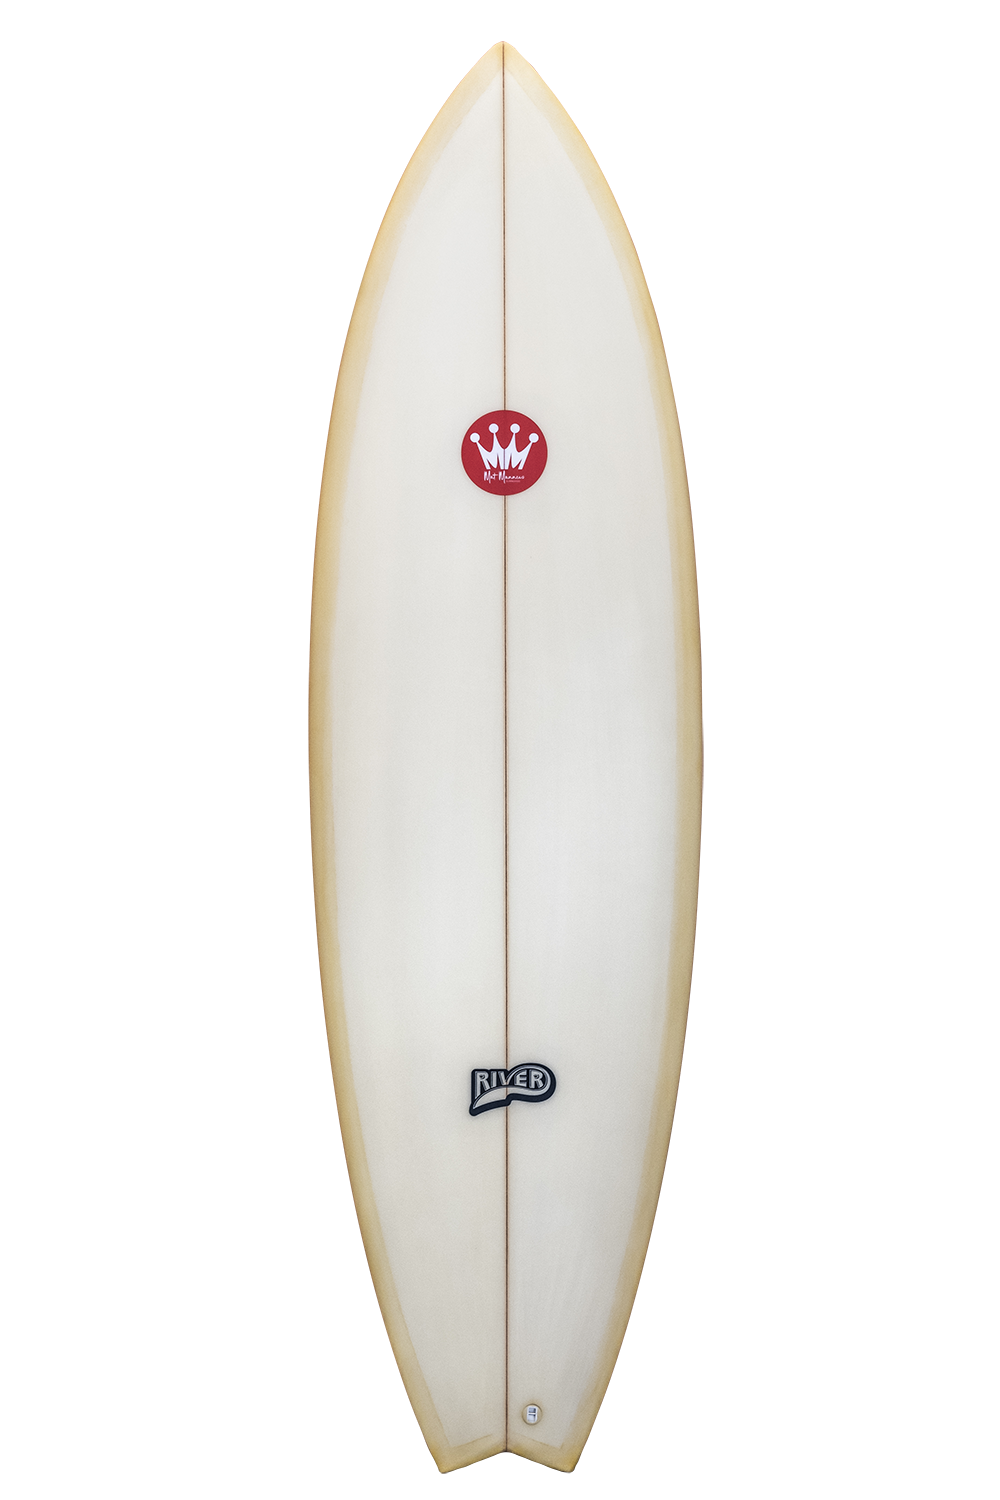   Shape : River   Length:  7’6”   Width:  19 7/8”   Thickness:  2 3/4”   Volume:  38L   Fins:  Thruster FCS II   Tail Shape:  Pin   